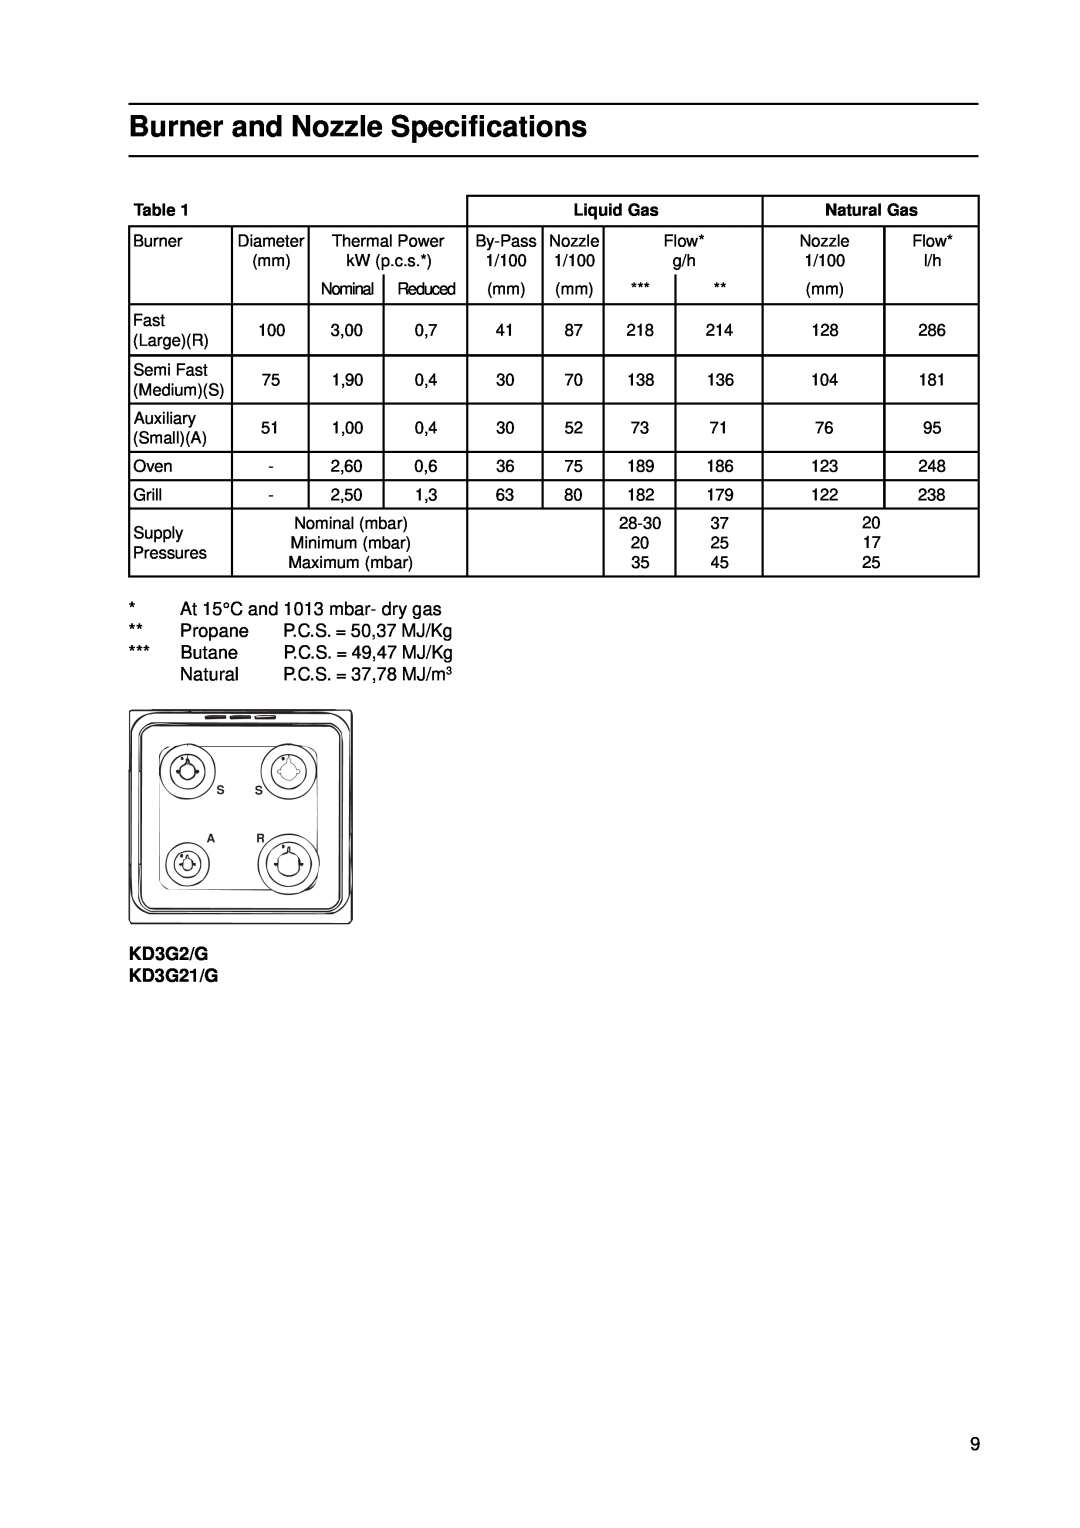 Indesit manual Burner and Nozzle Specifications, KD3G2/G KD3G21/G, Liquid Gas, Natural Gas 